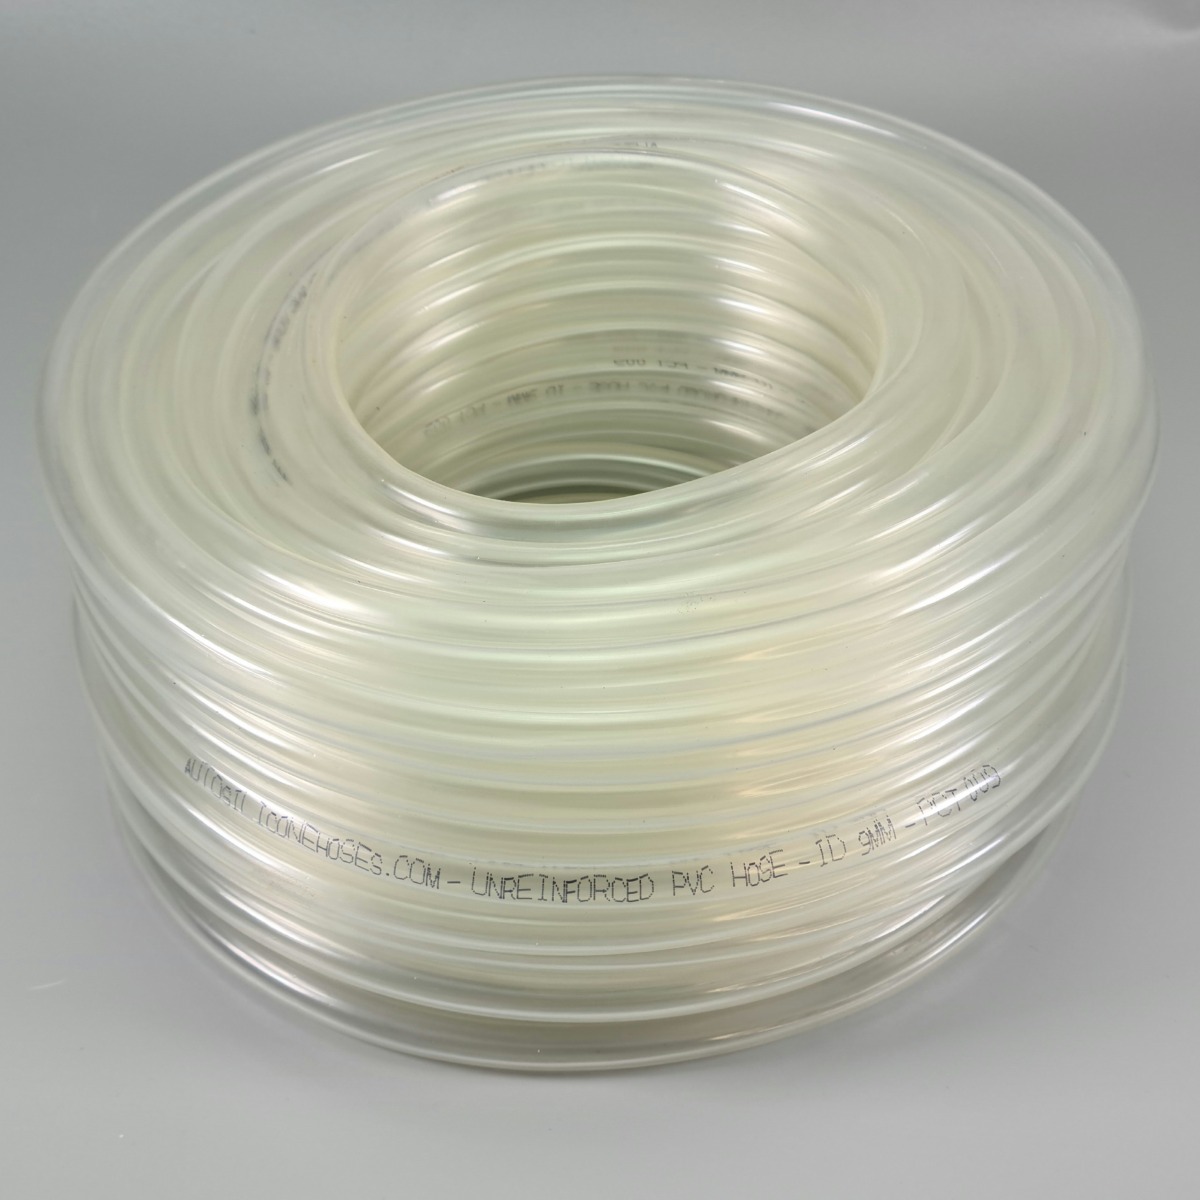 Clear PVC Plastic Tube/Pipe/Hose UK Stock Same Day Dispatch Fast Durable 